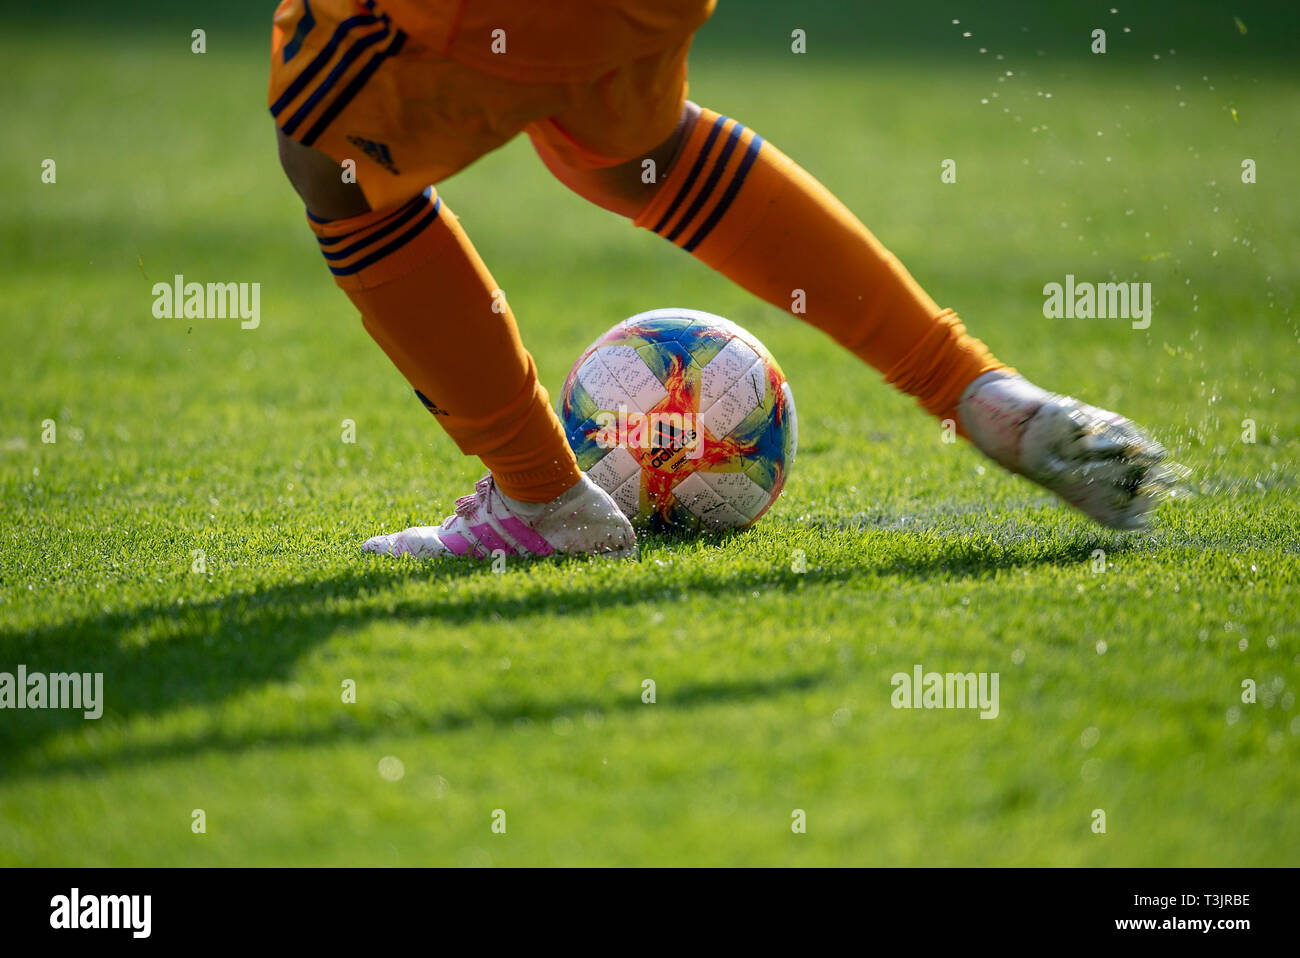 Adidas Football Japan High Resolution Stock Photography and Images - Alamy